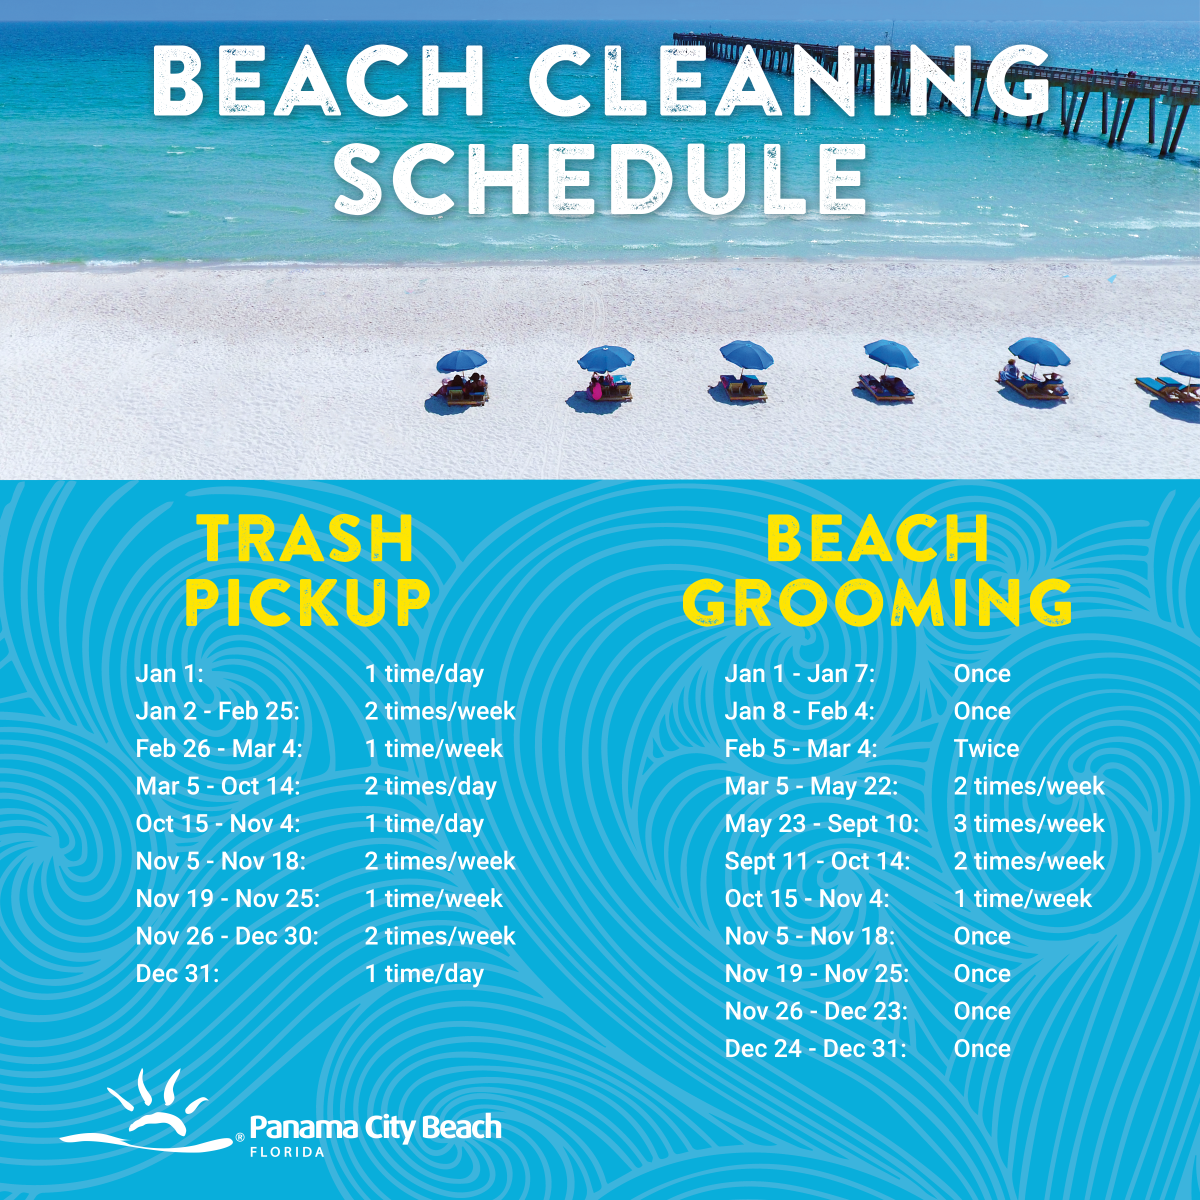 Beach Cleaning Schedule and Trash Pickup